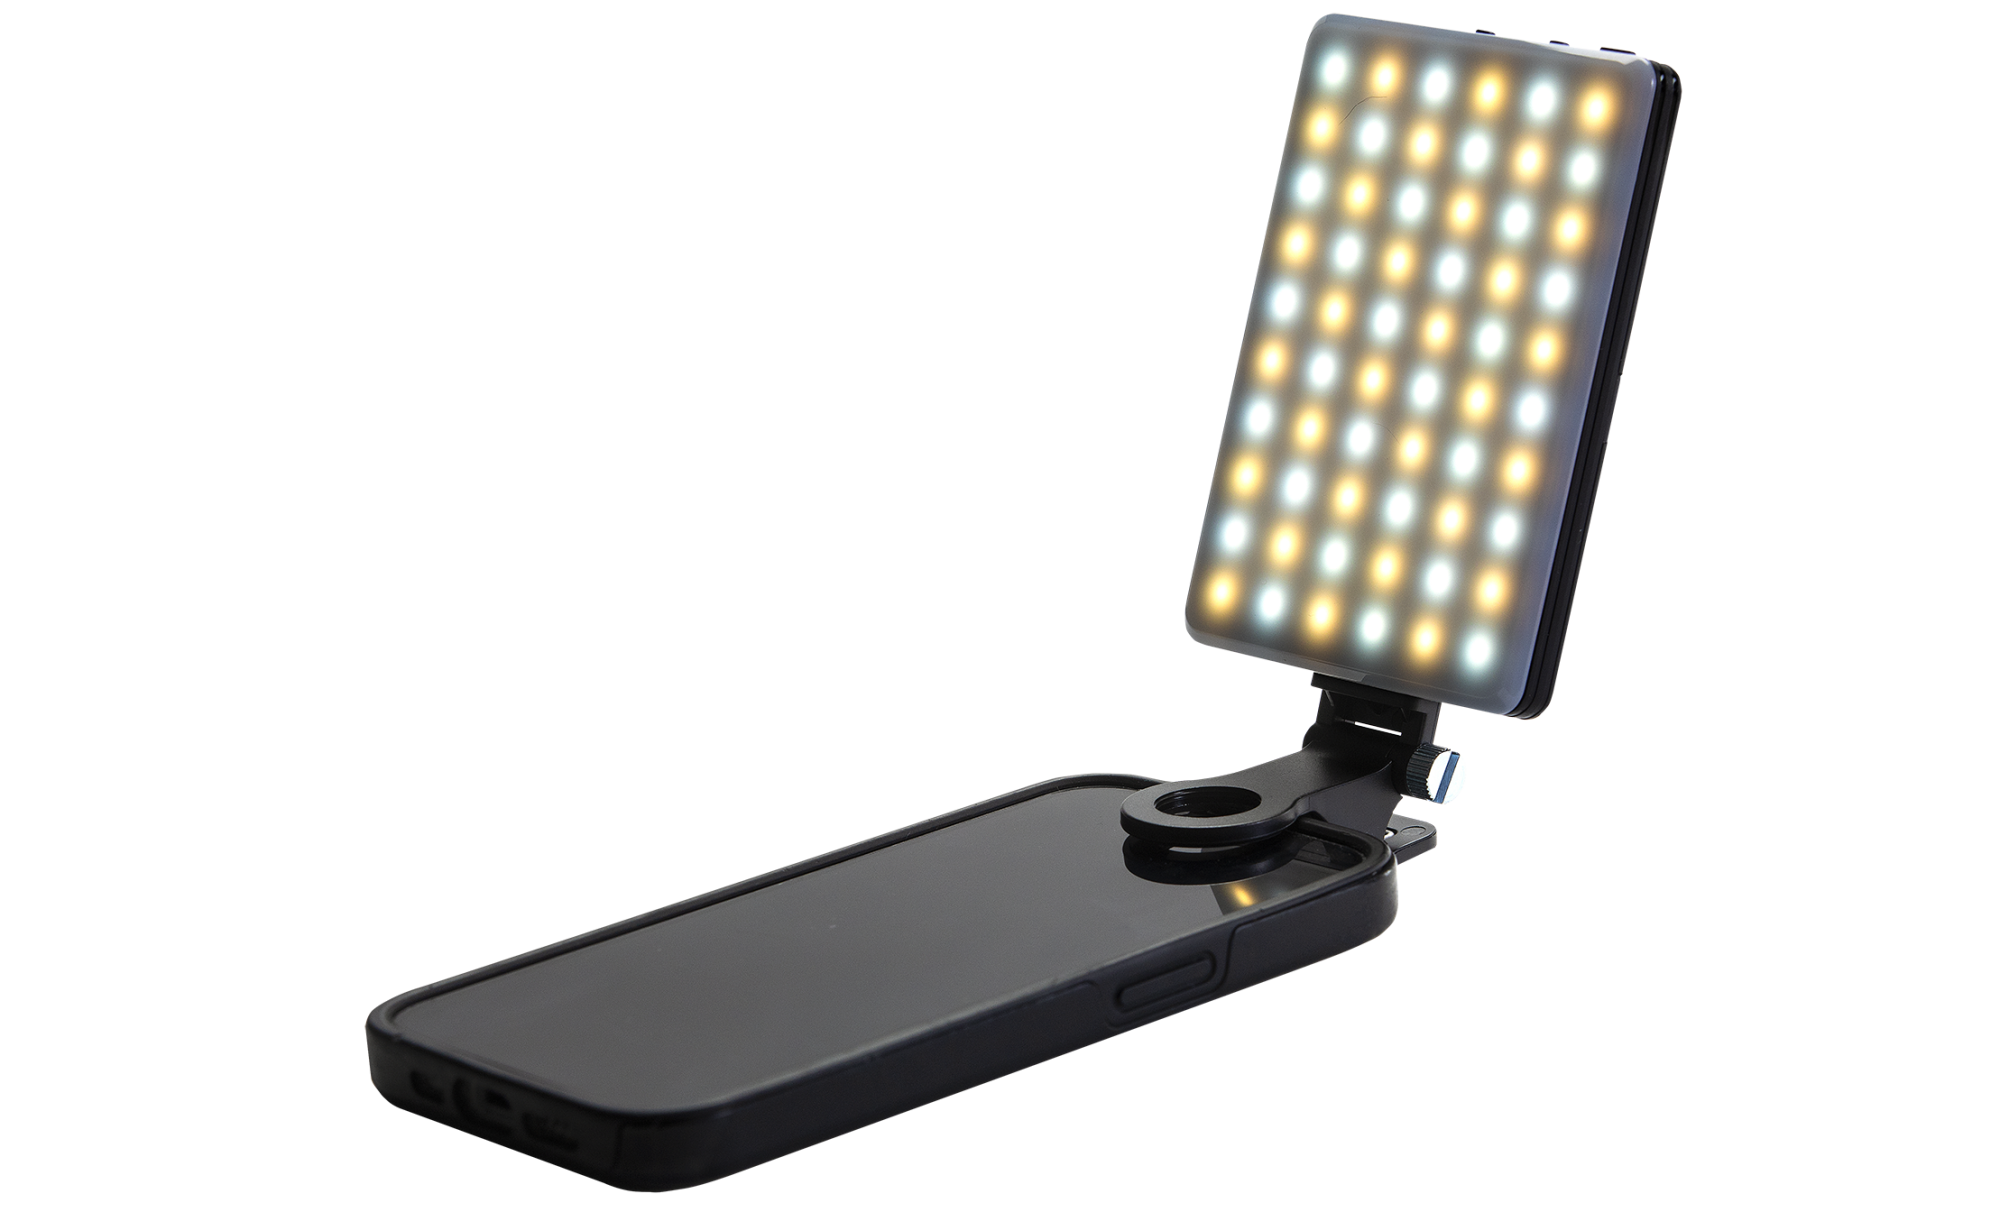 Newmowa LED clip video light attached to a cellphone